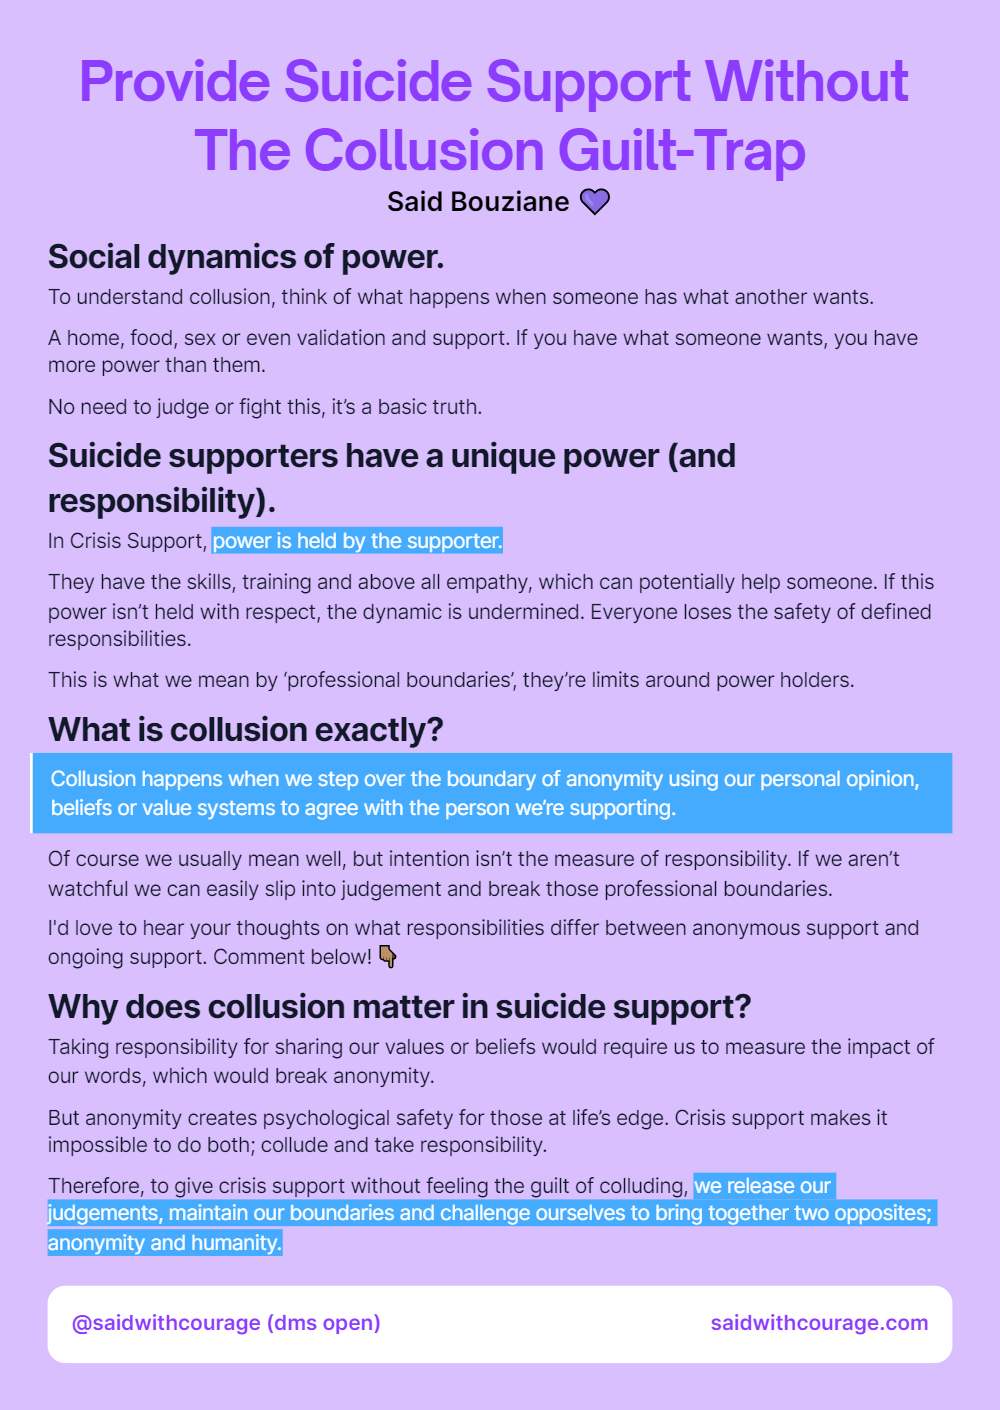 Provide Suicide Support Without The Collusion Guilt-Trap